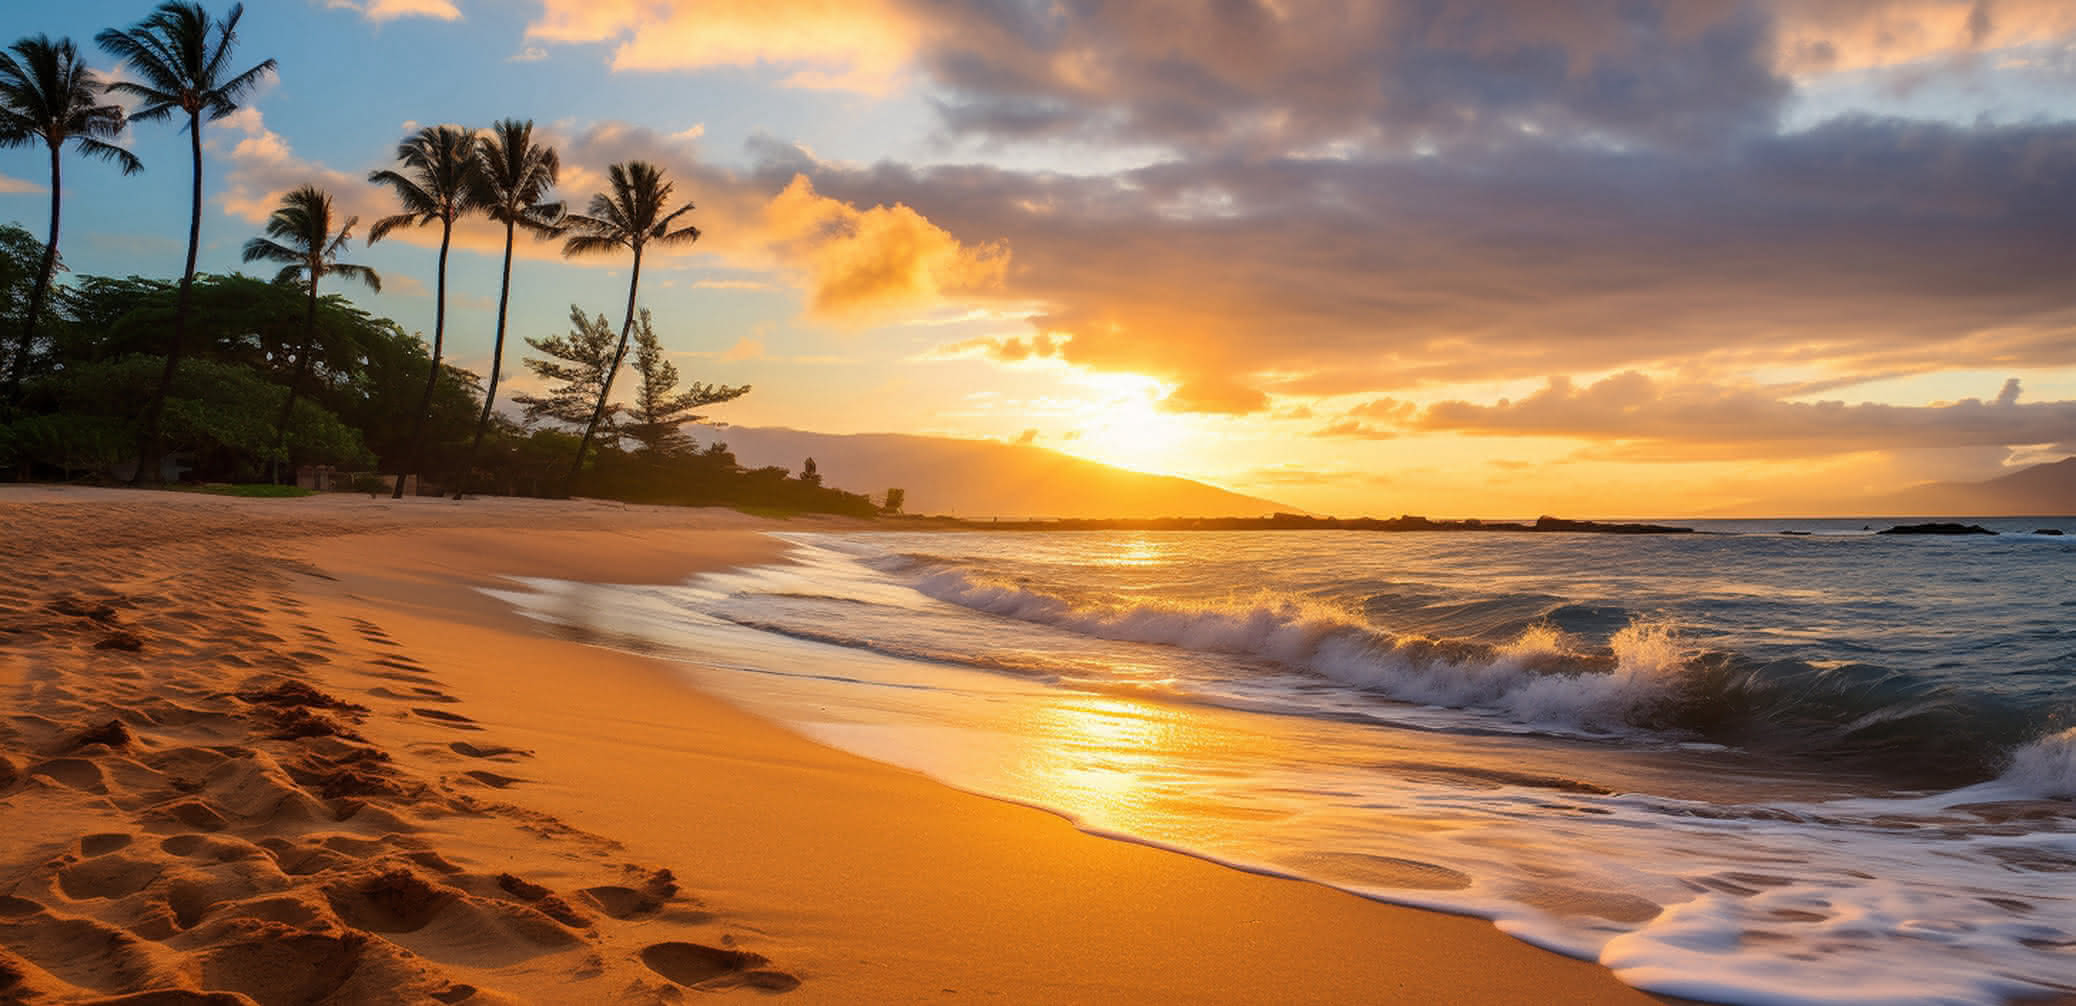 10 Best Beaches In Maui For Families